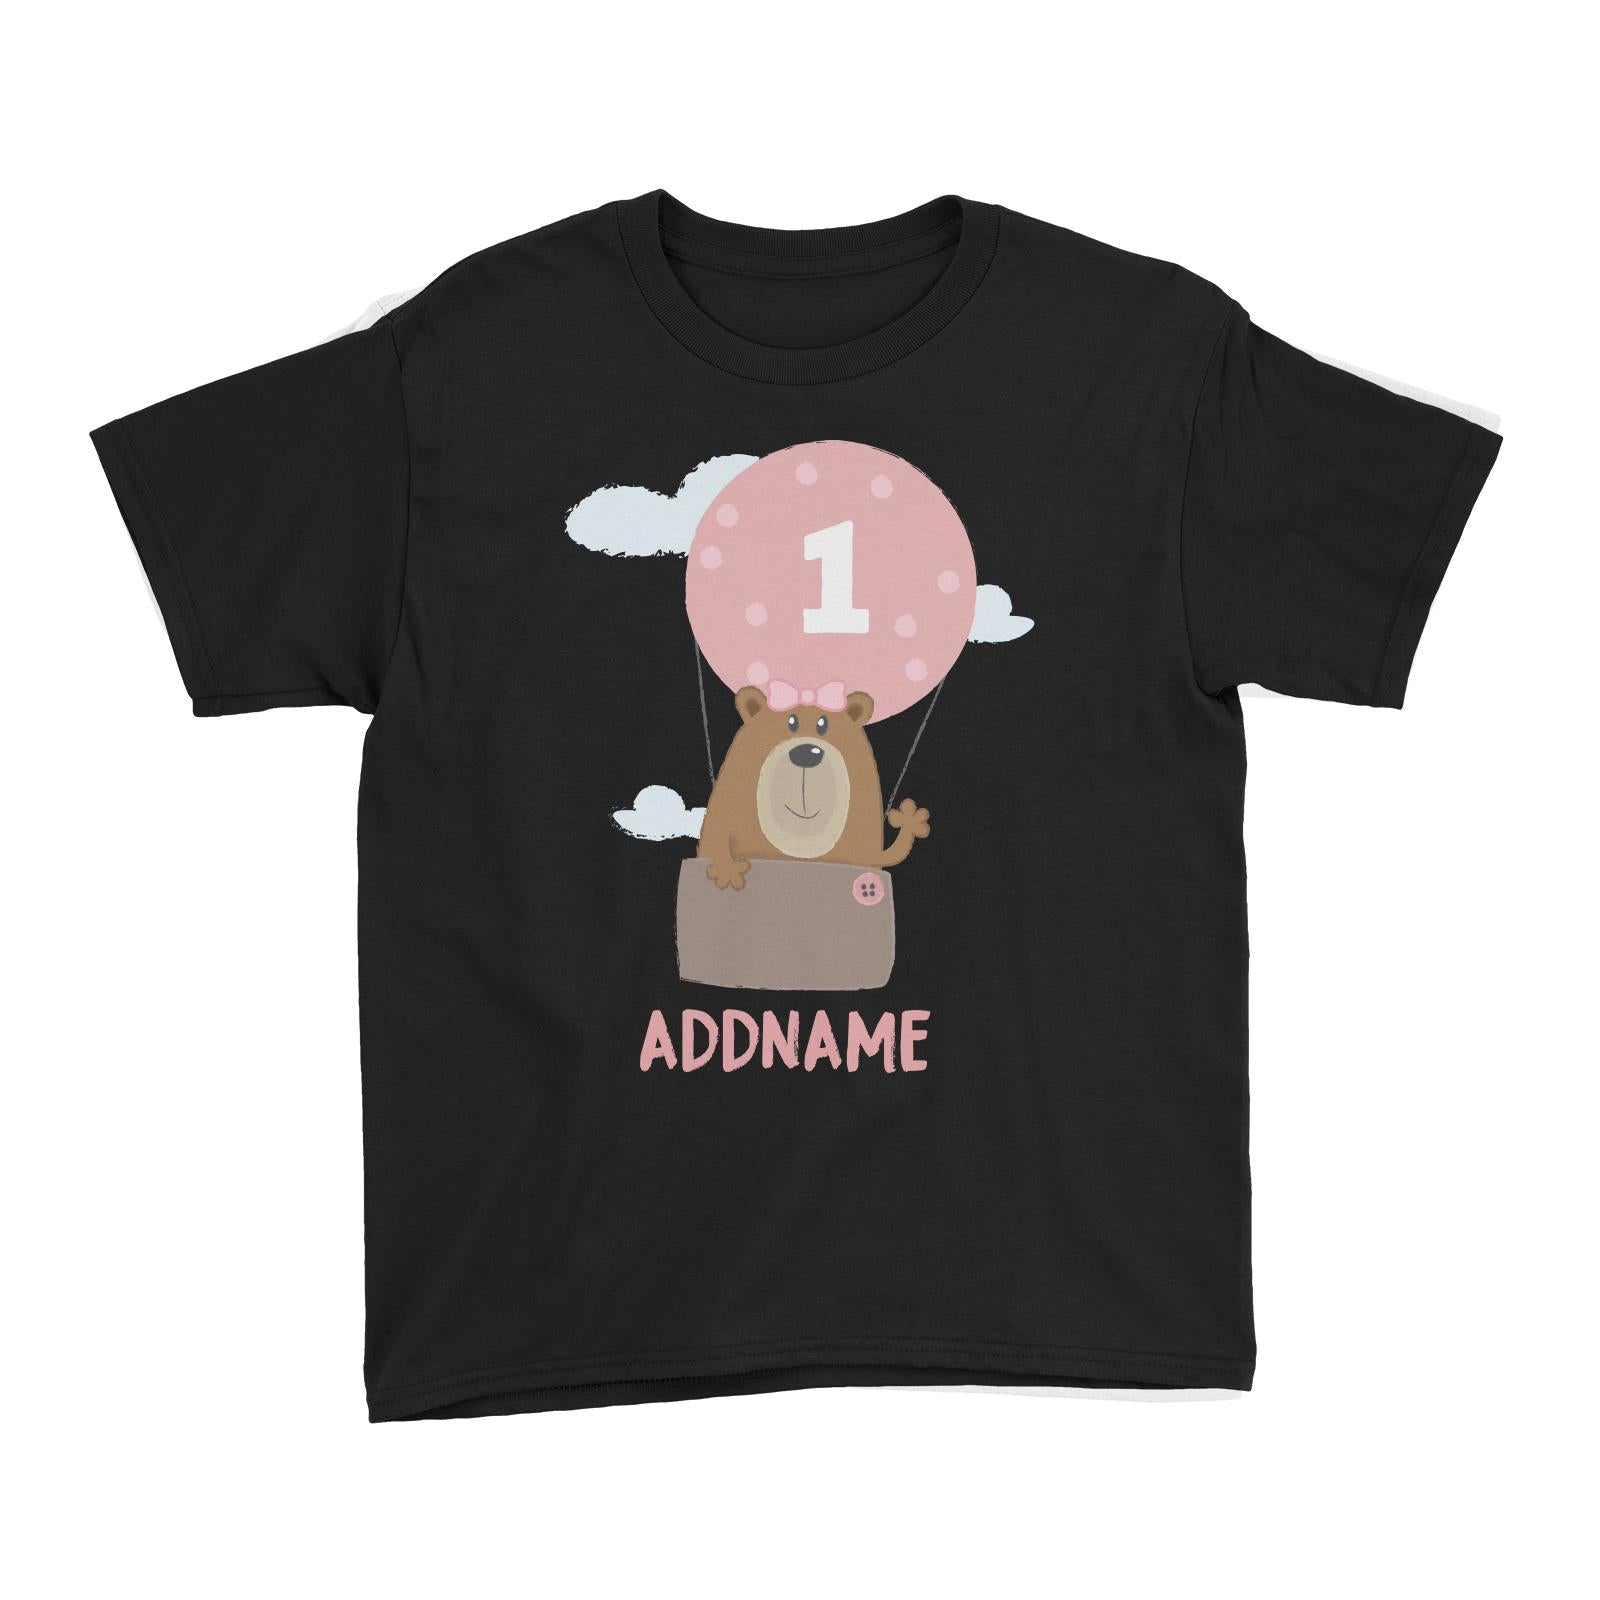 Cute Bear Girl with Hot Air Balloon Birthday Theme Personalizable with Name and Number Kid's T-Shirt